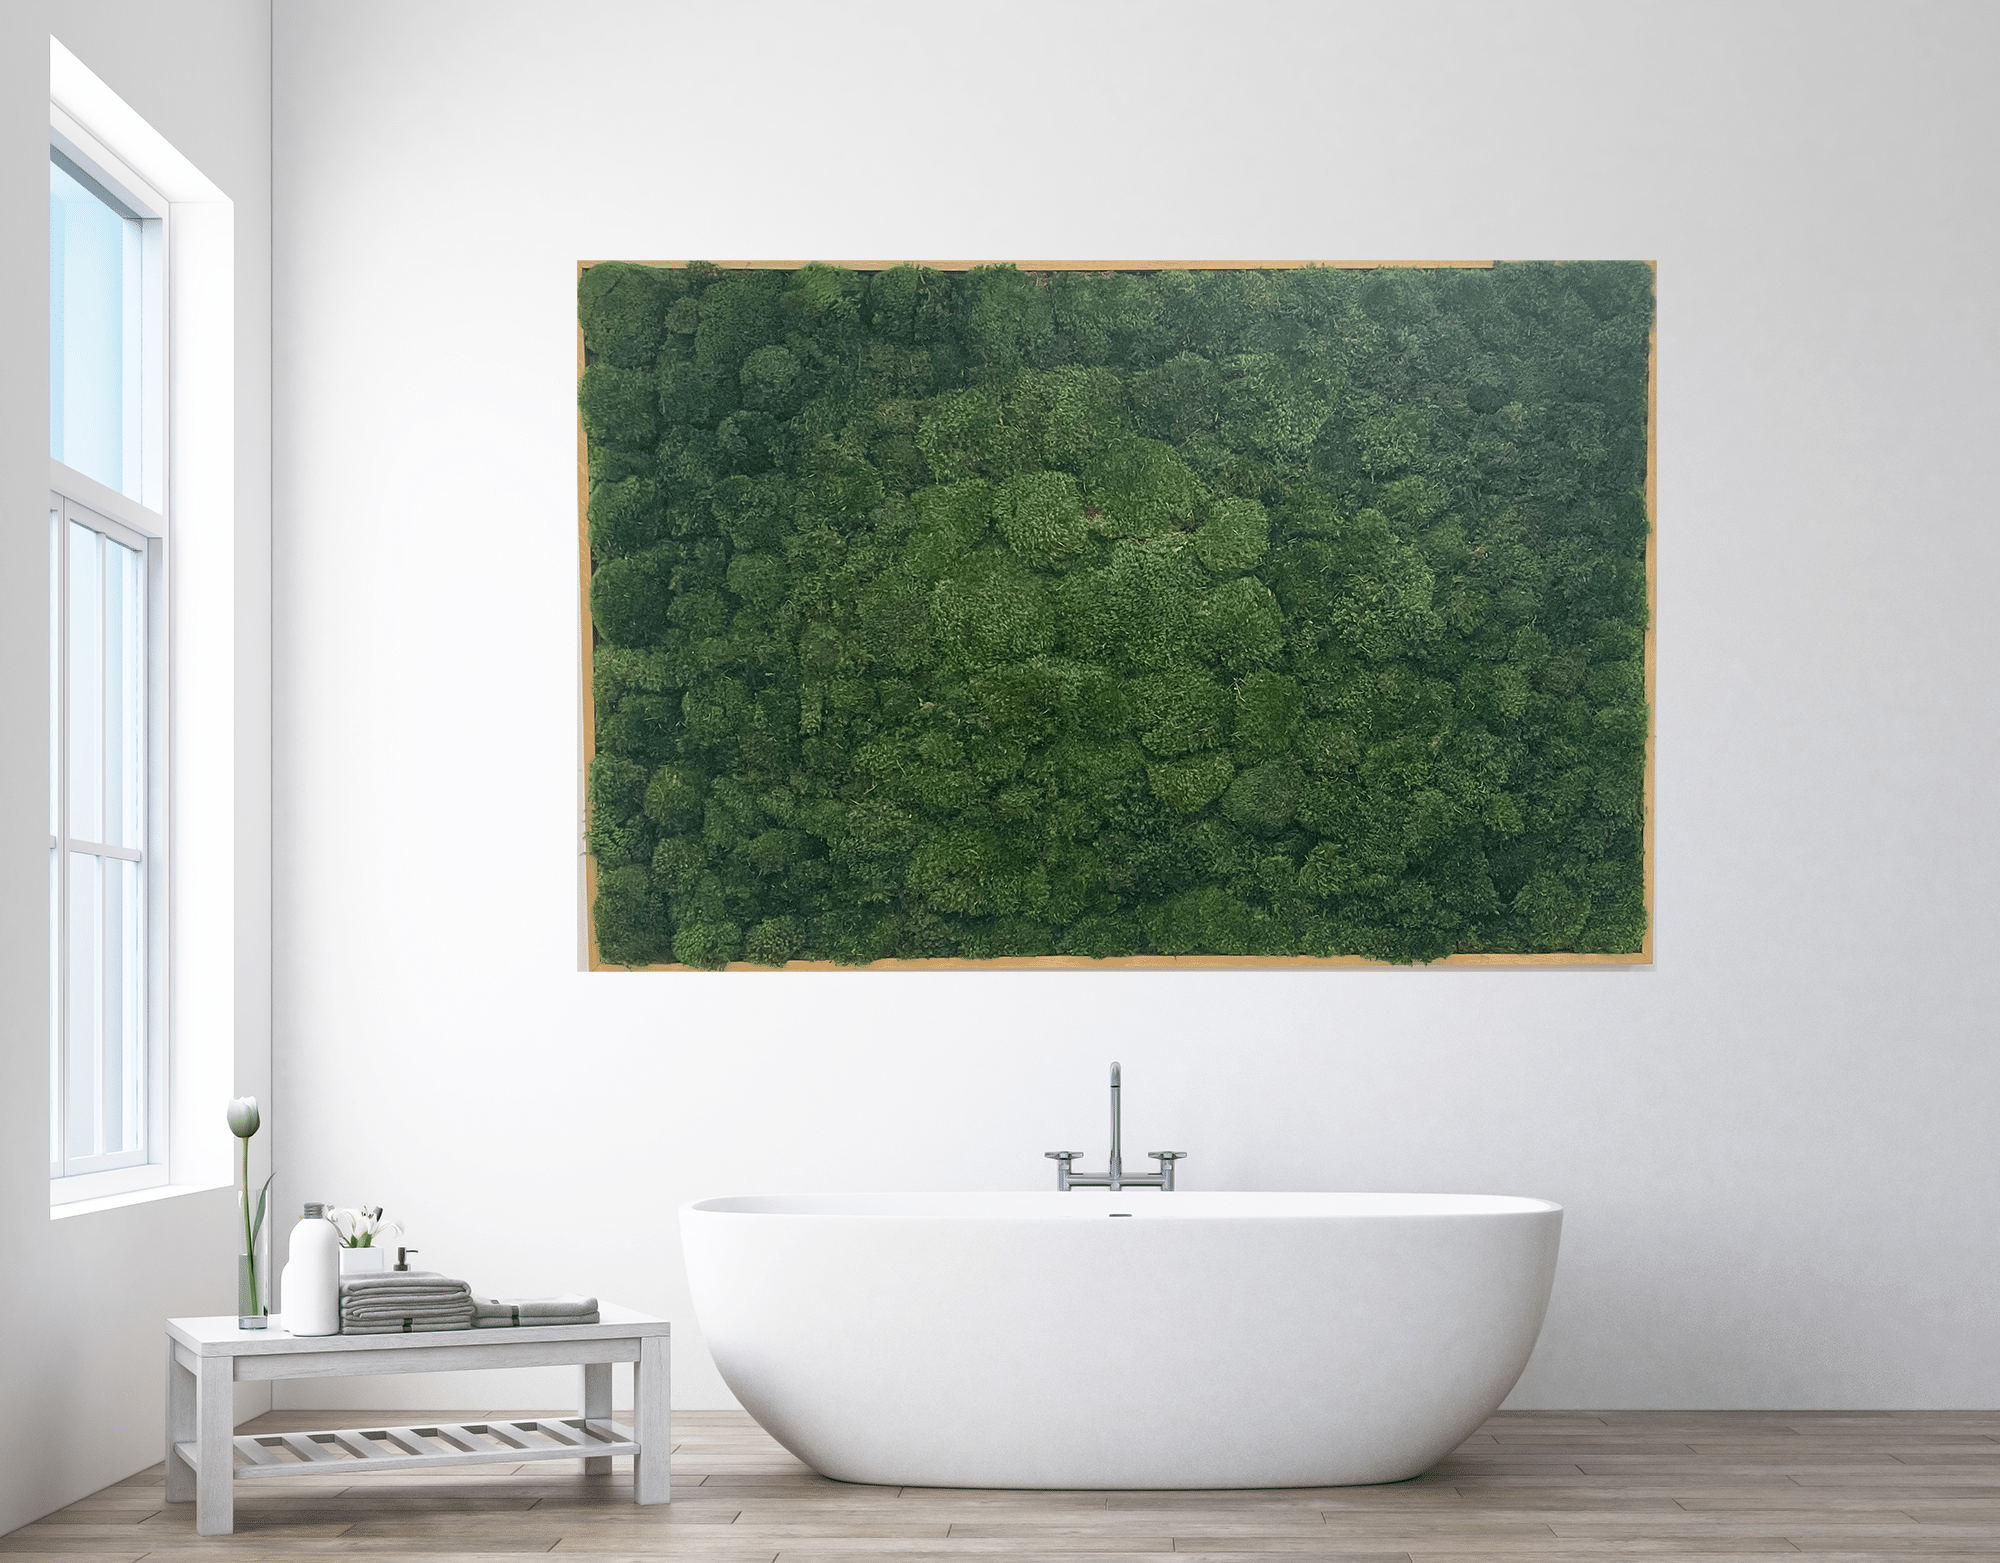 MossAire Living Moss Wall Frame: A Natural Air Filter & Stress Relief –  Moss Acres Biophilic Studio & Workshop